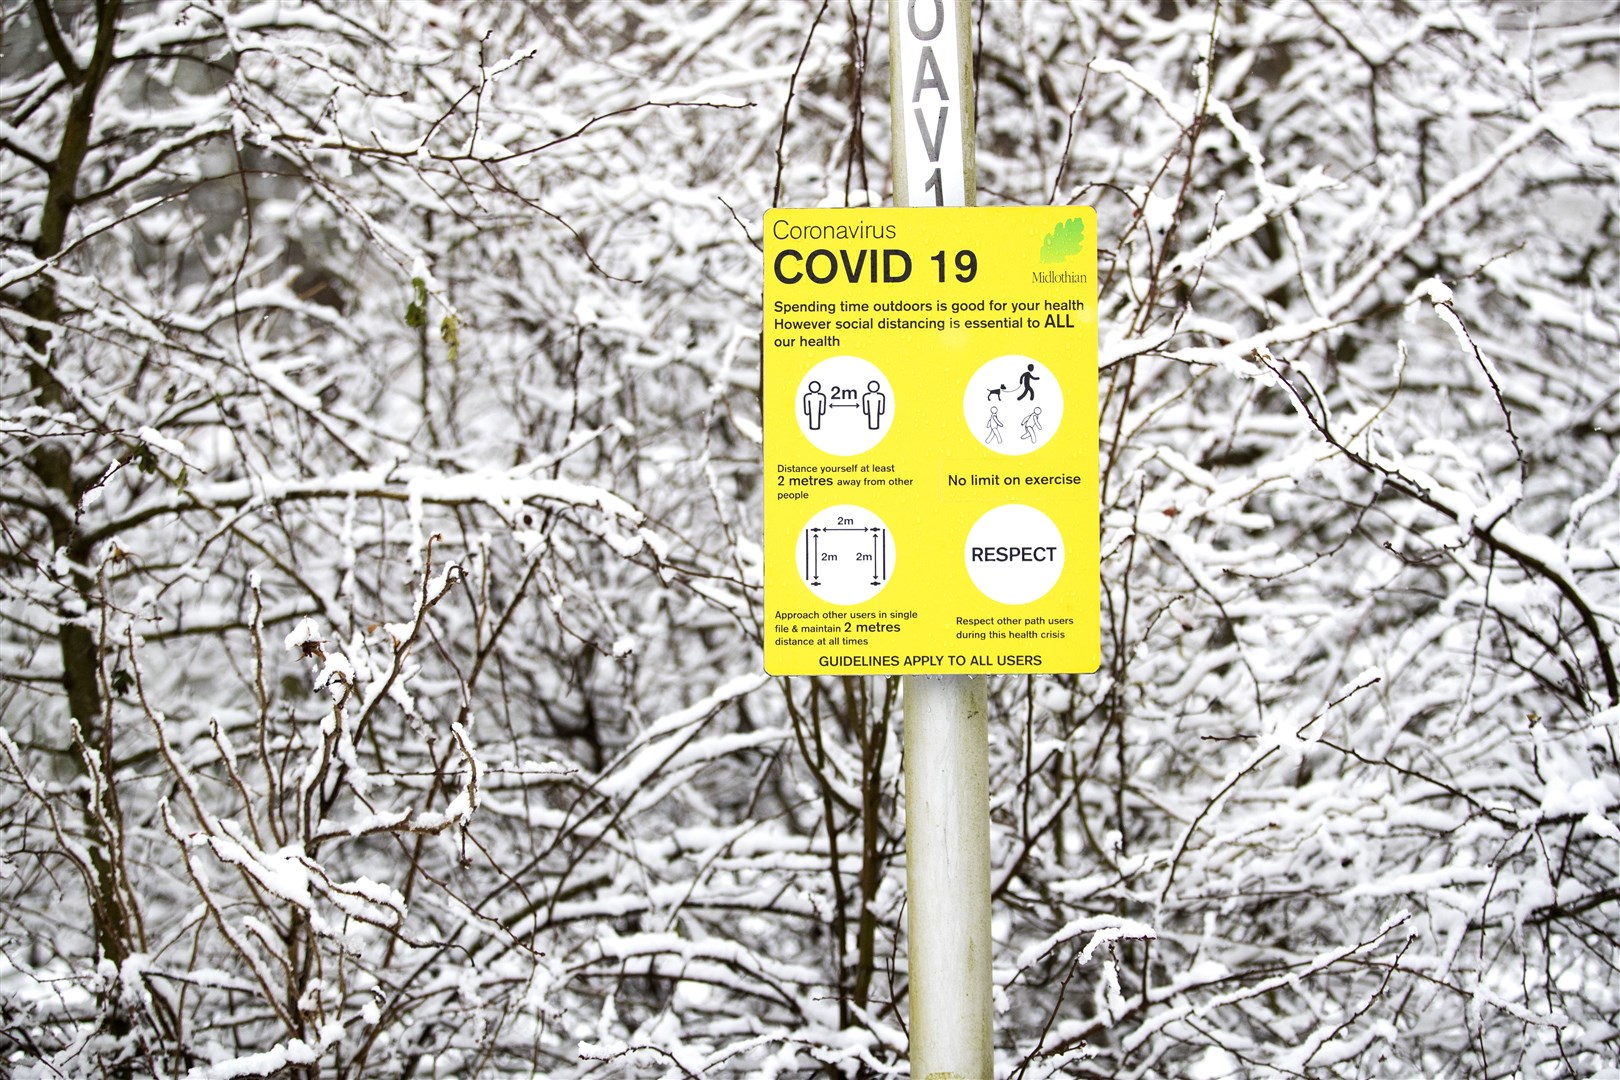 A coronavirus information sign surrounded by snow in Auchendinny, Midlothian (Jane Barlow/PA)